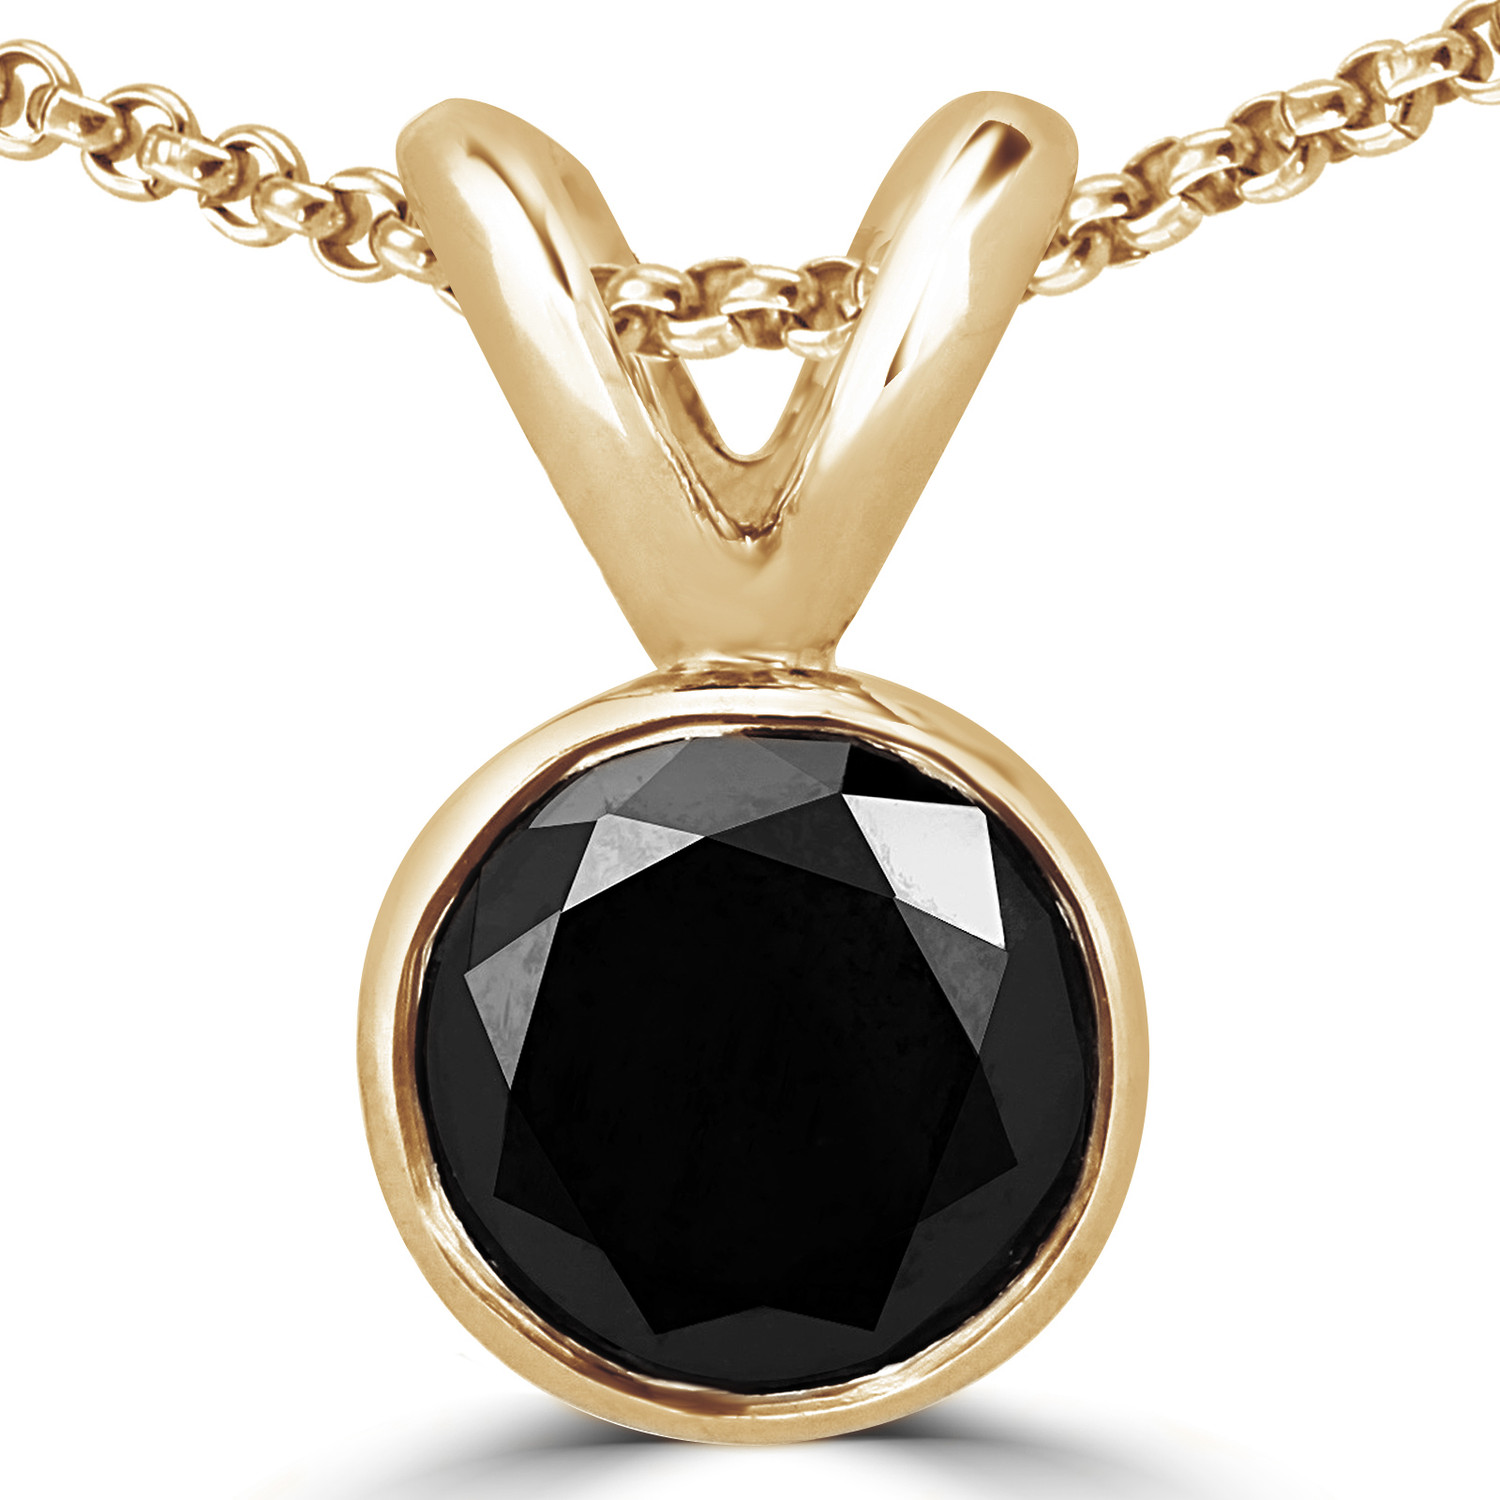 Round Black Diamond Bezel Set Solitaire Pendant Necklace in 14K Yellow Gold with Chain (MVSPB0001-Y)